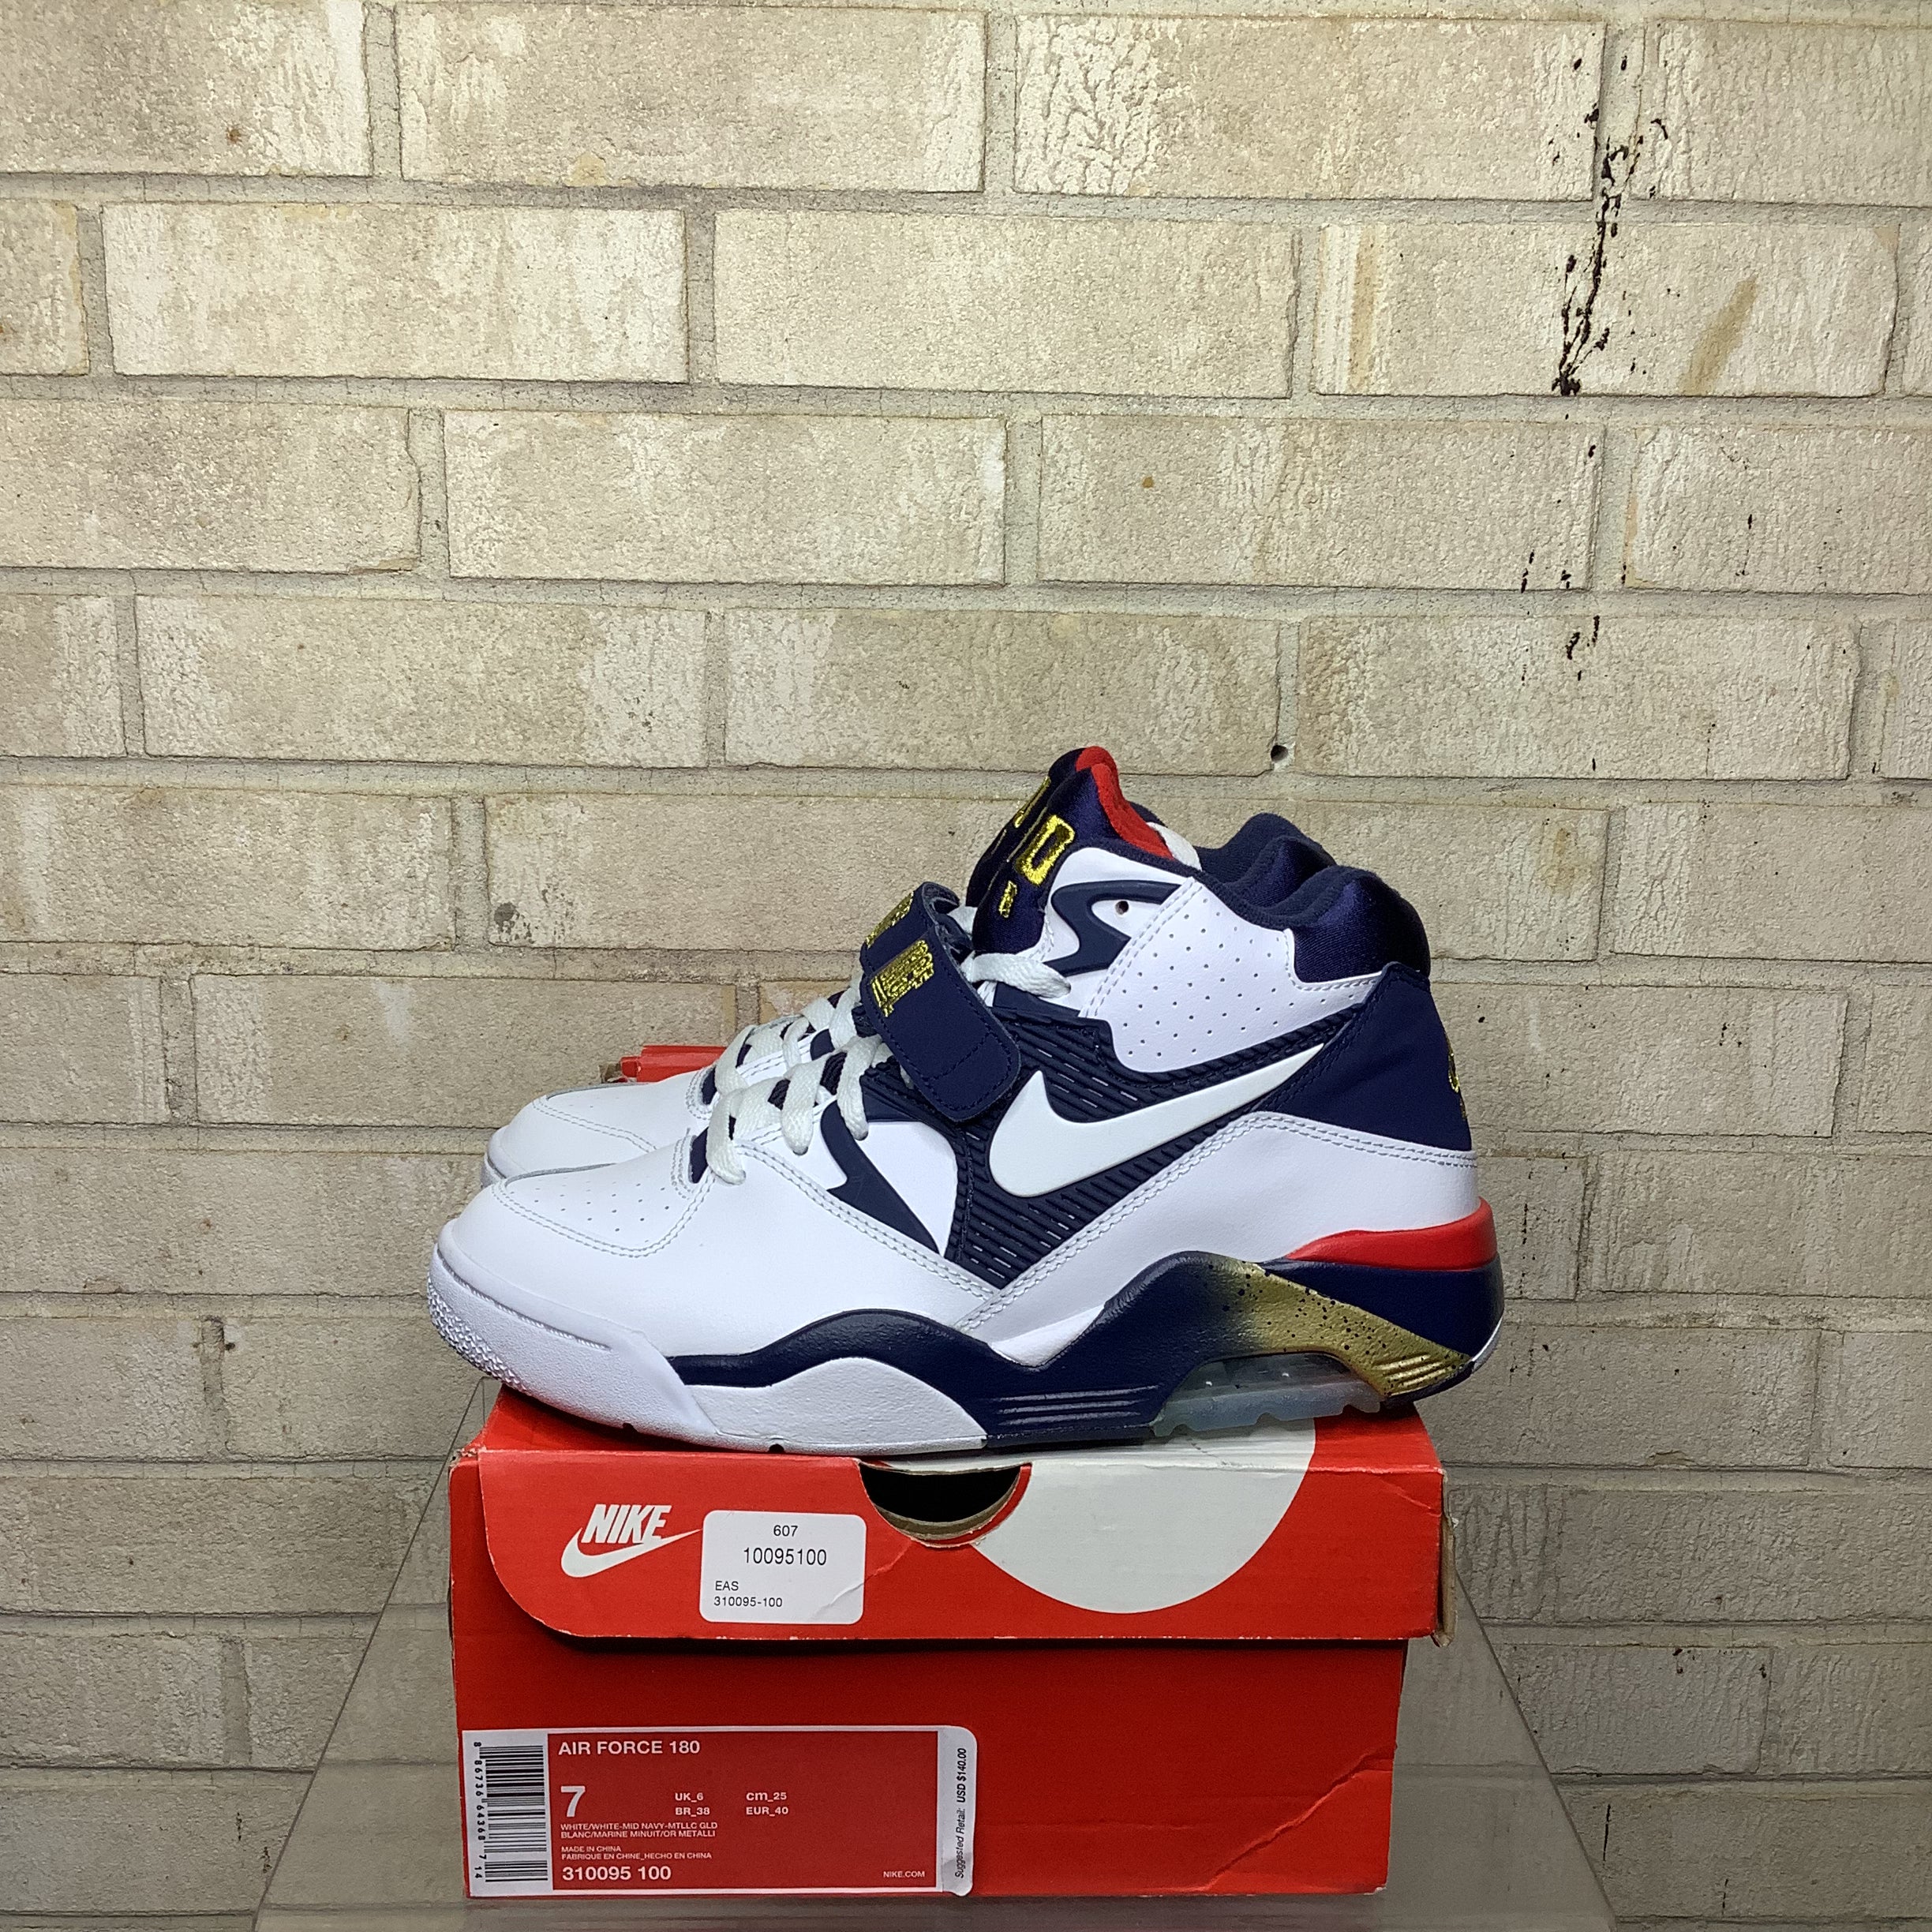 NIKE AIR FORCE 180 OLYMPIC SIZE 7 310095-100